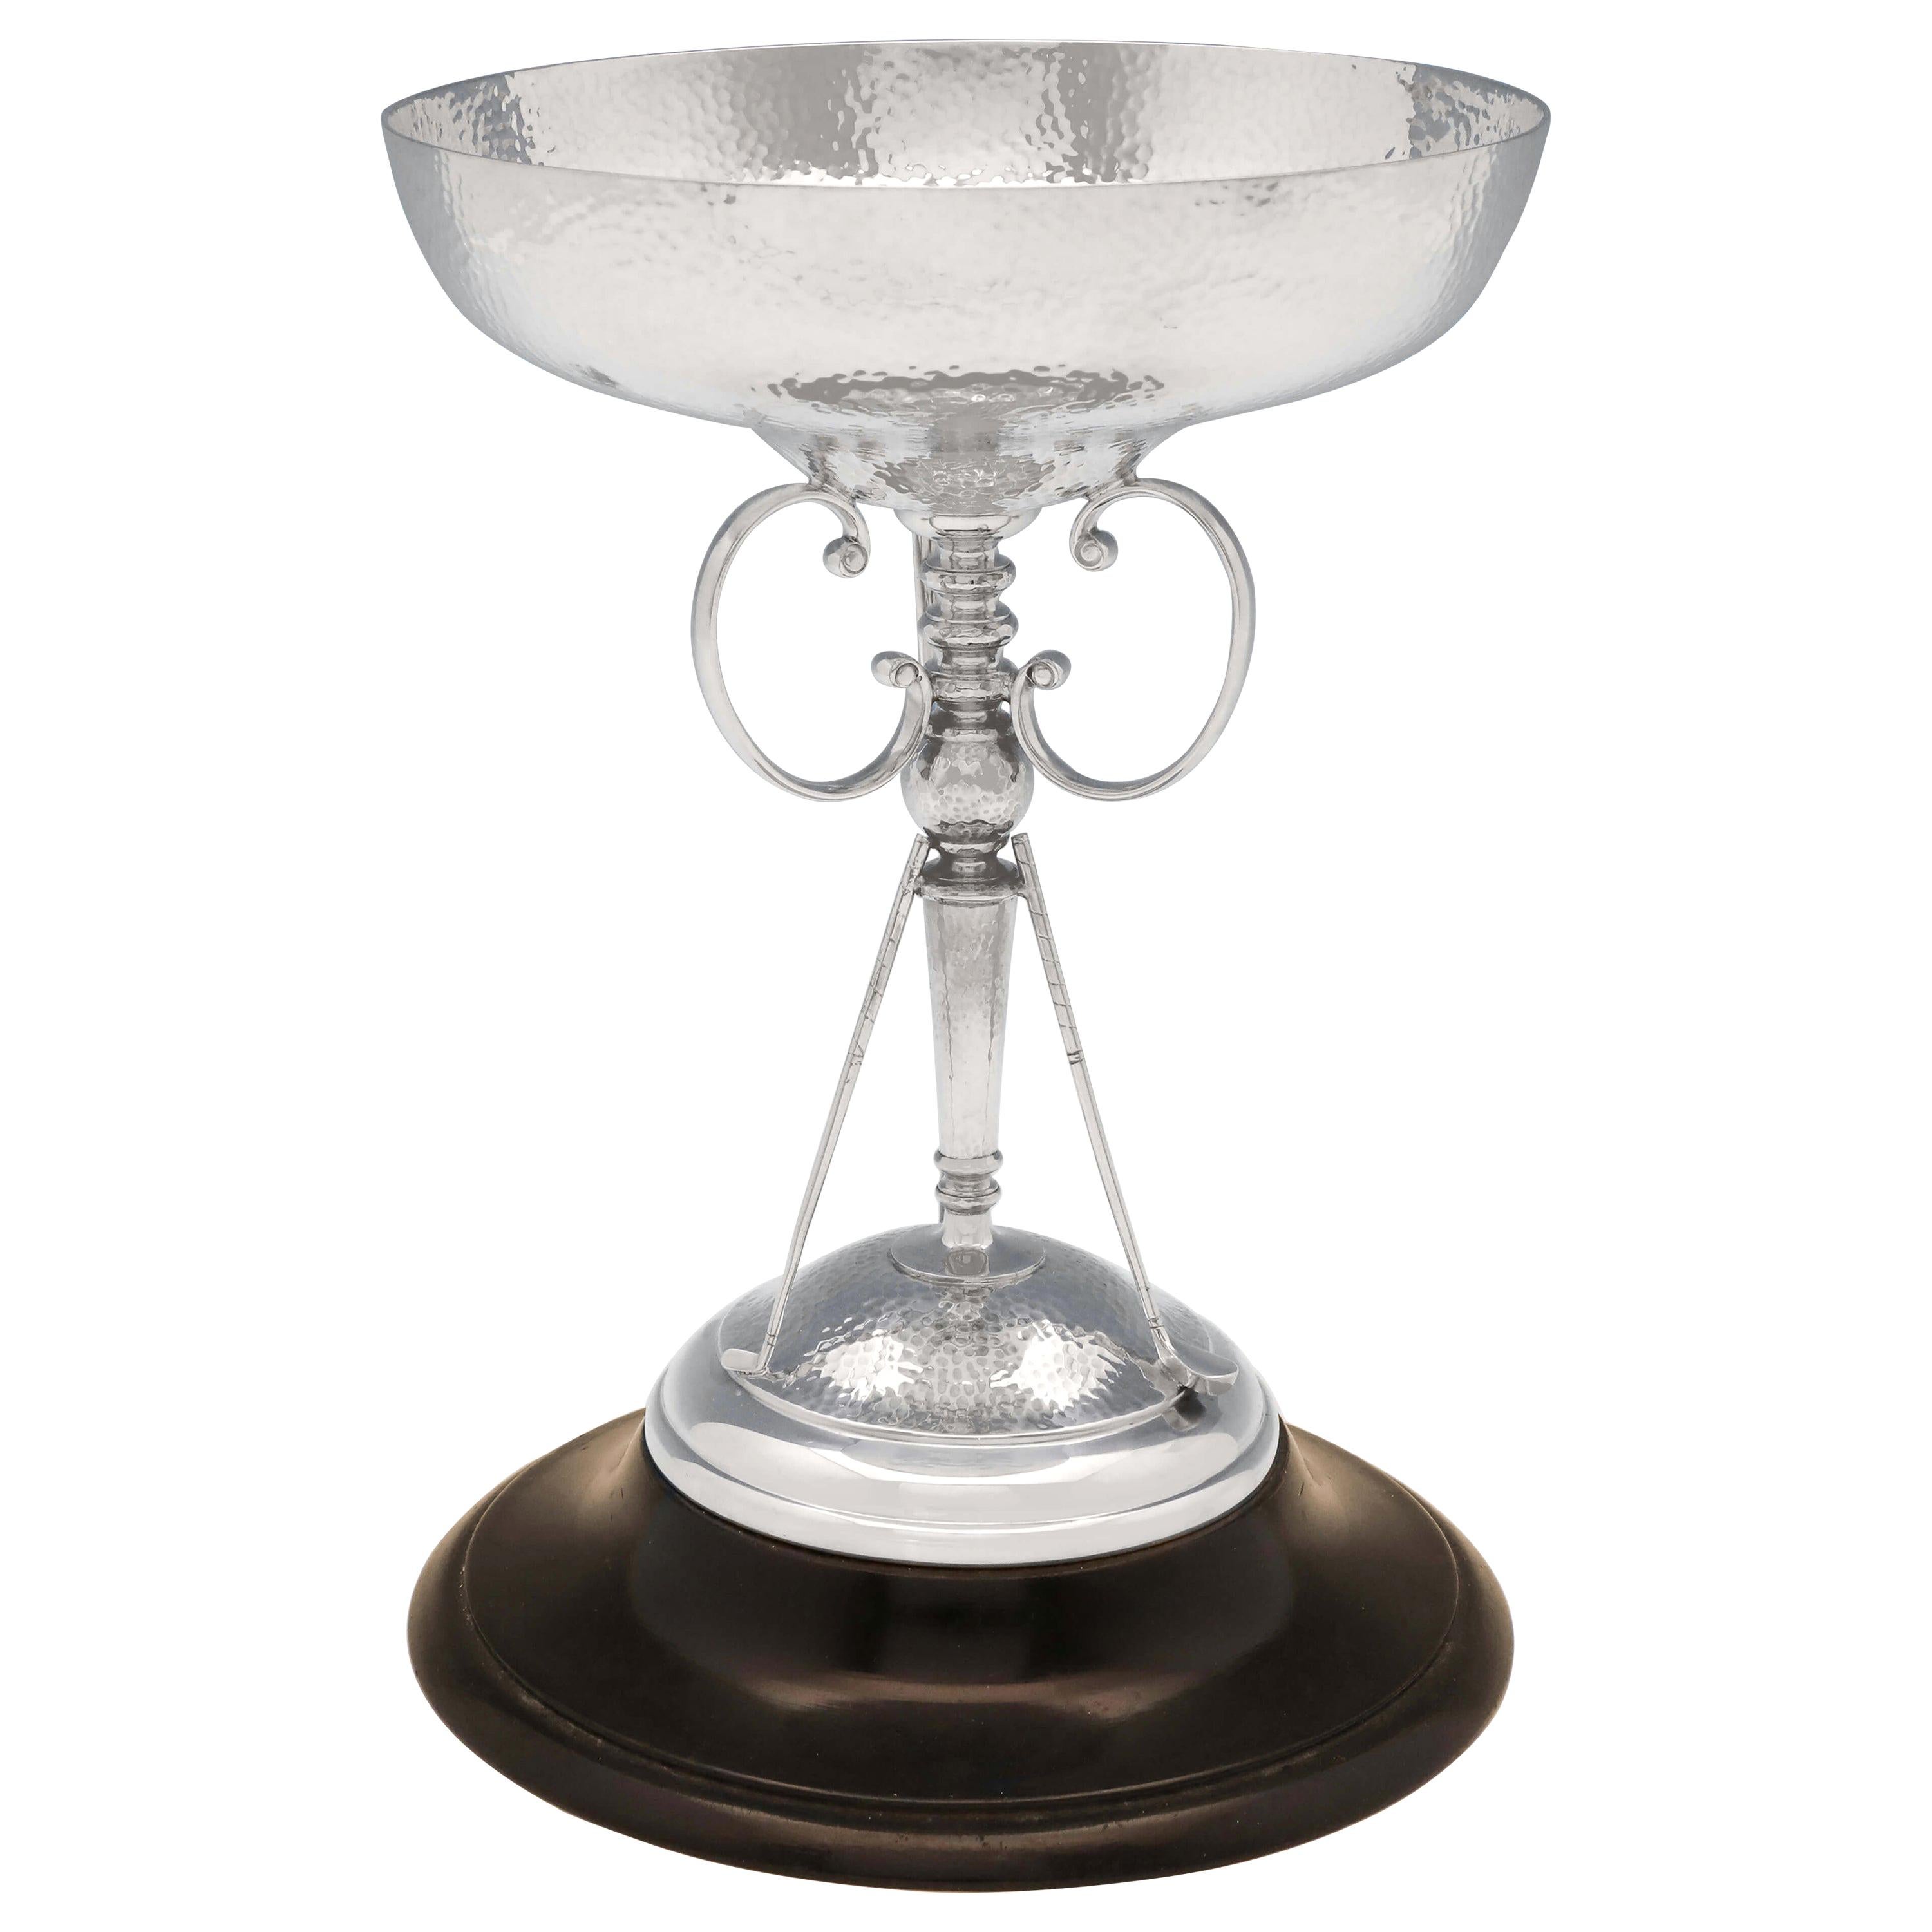 Hallmarked in Sheffield in 1930 by R. F. Moseley & Co., this fantastic, George V, Art Deco, sterling silver golf trophy, features a hand hammered finish, the original wooden plinth, and three golf clubs sporting the central column. The golf trophy